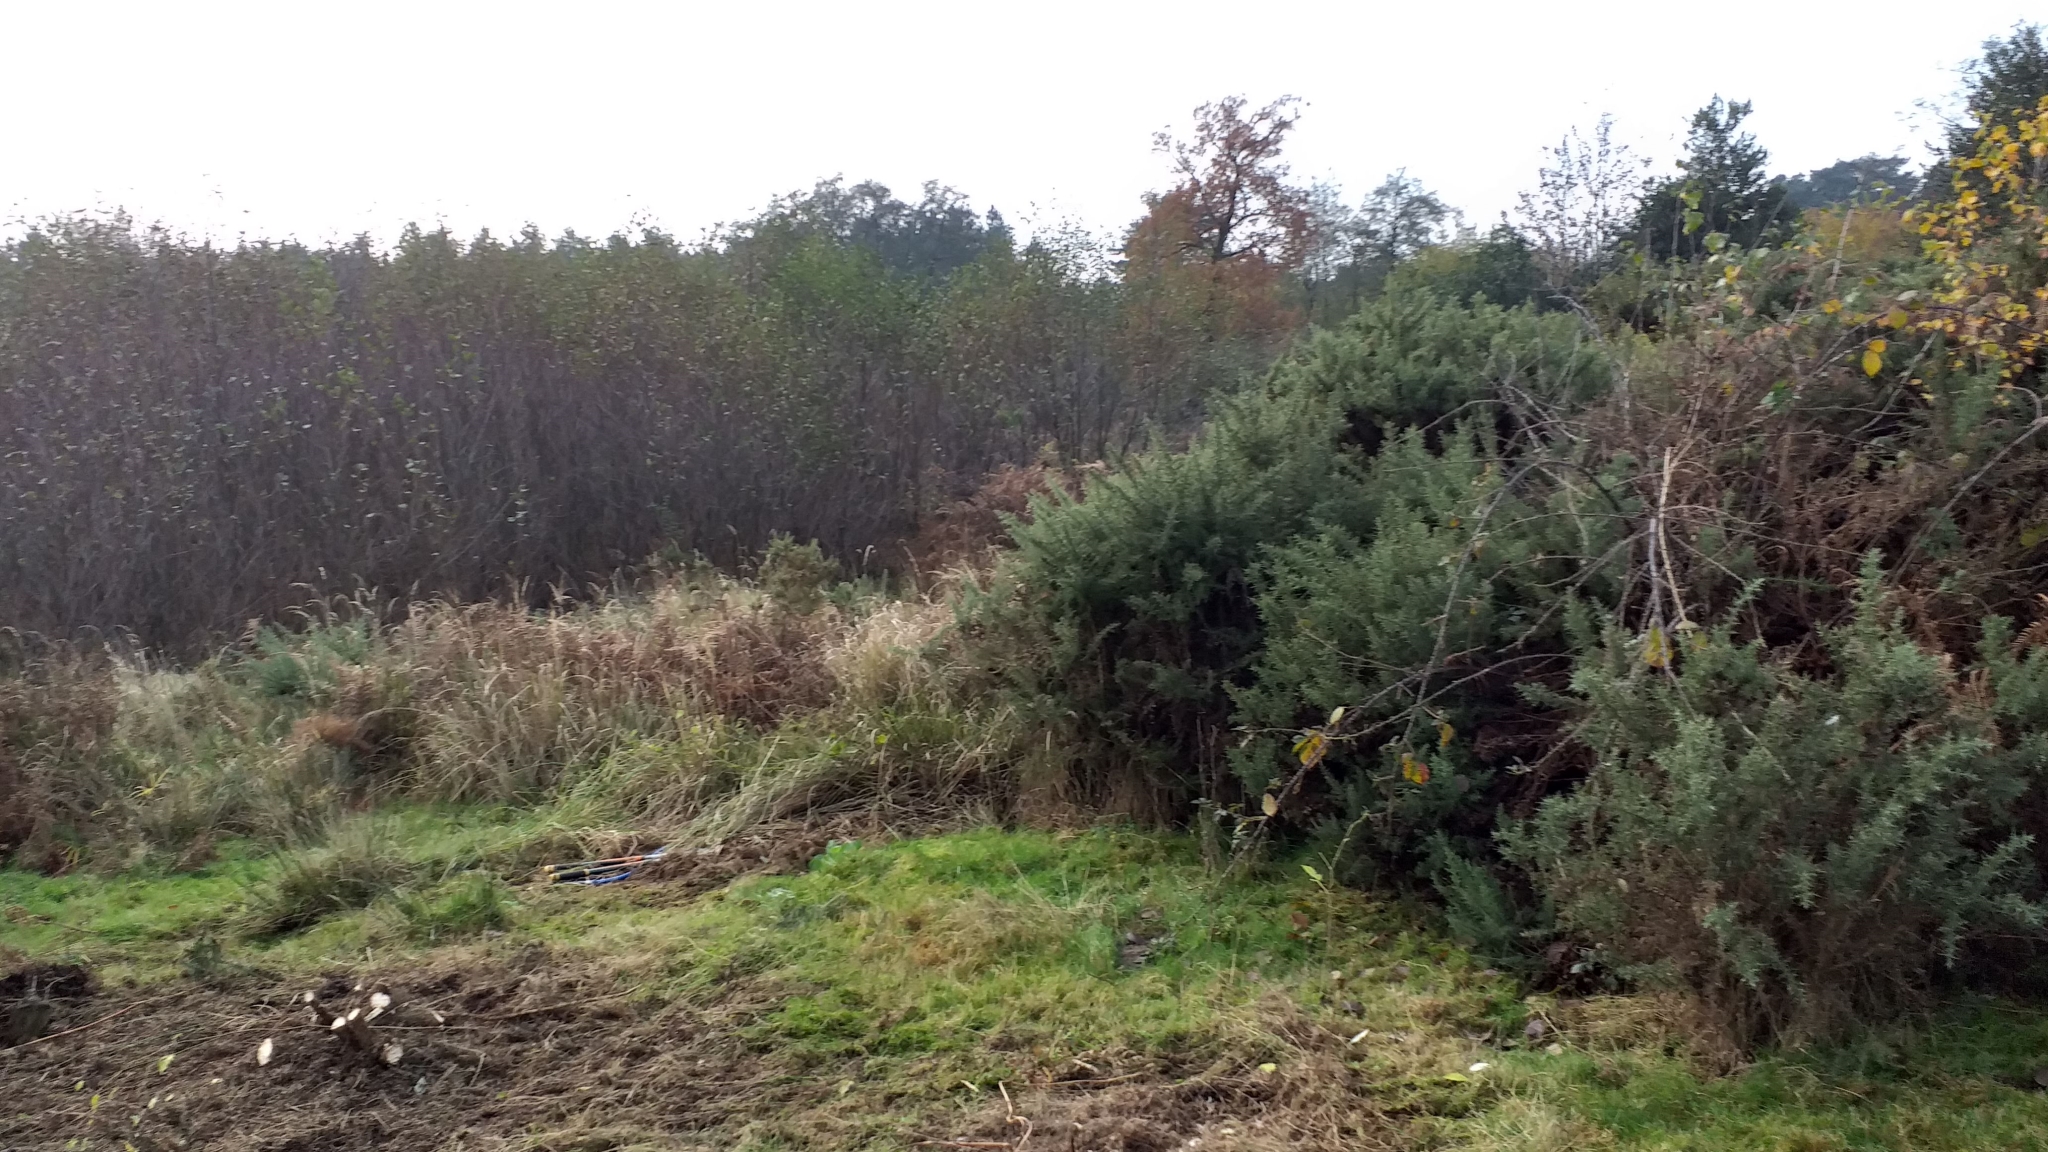 A photo from the FoTF Conservation Event - November 2019 - Gorse Clearance at Hockham Hills & Holes : An area of cleared Gorse, with another Gorse bush in the background